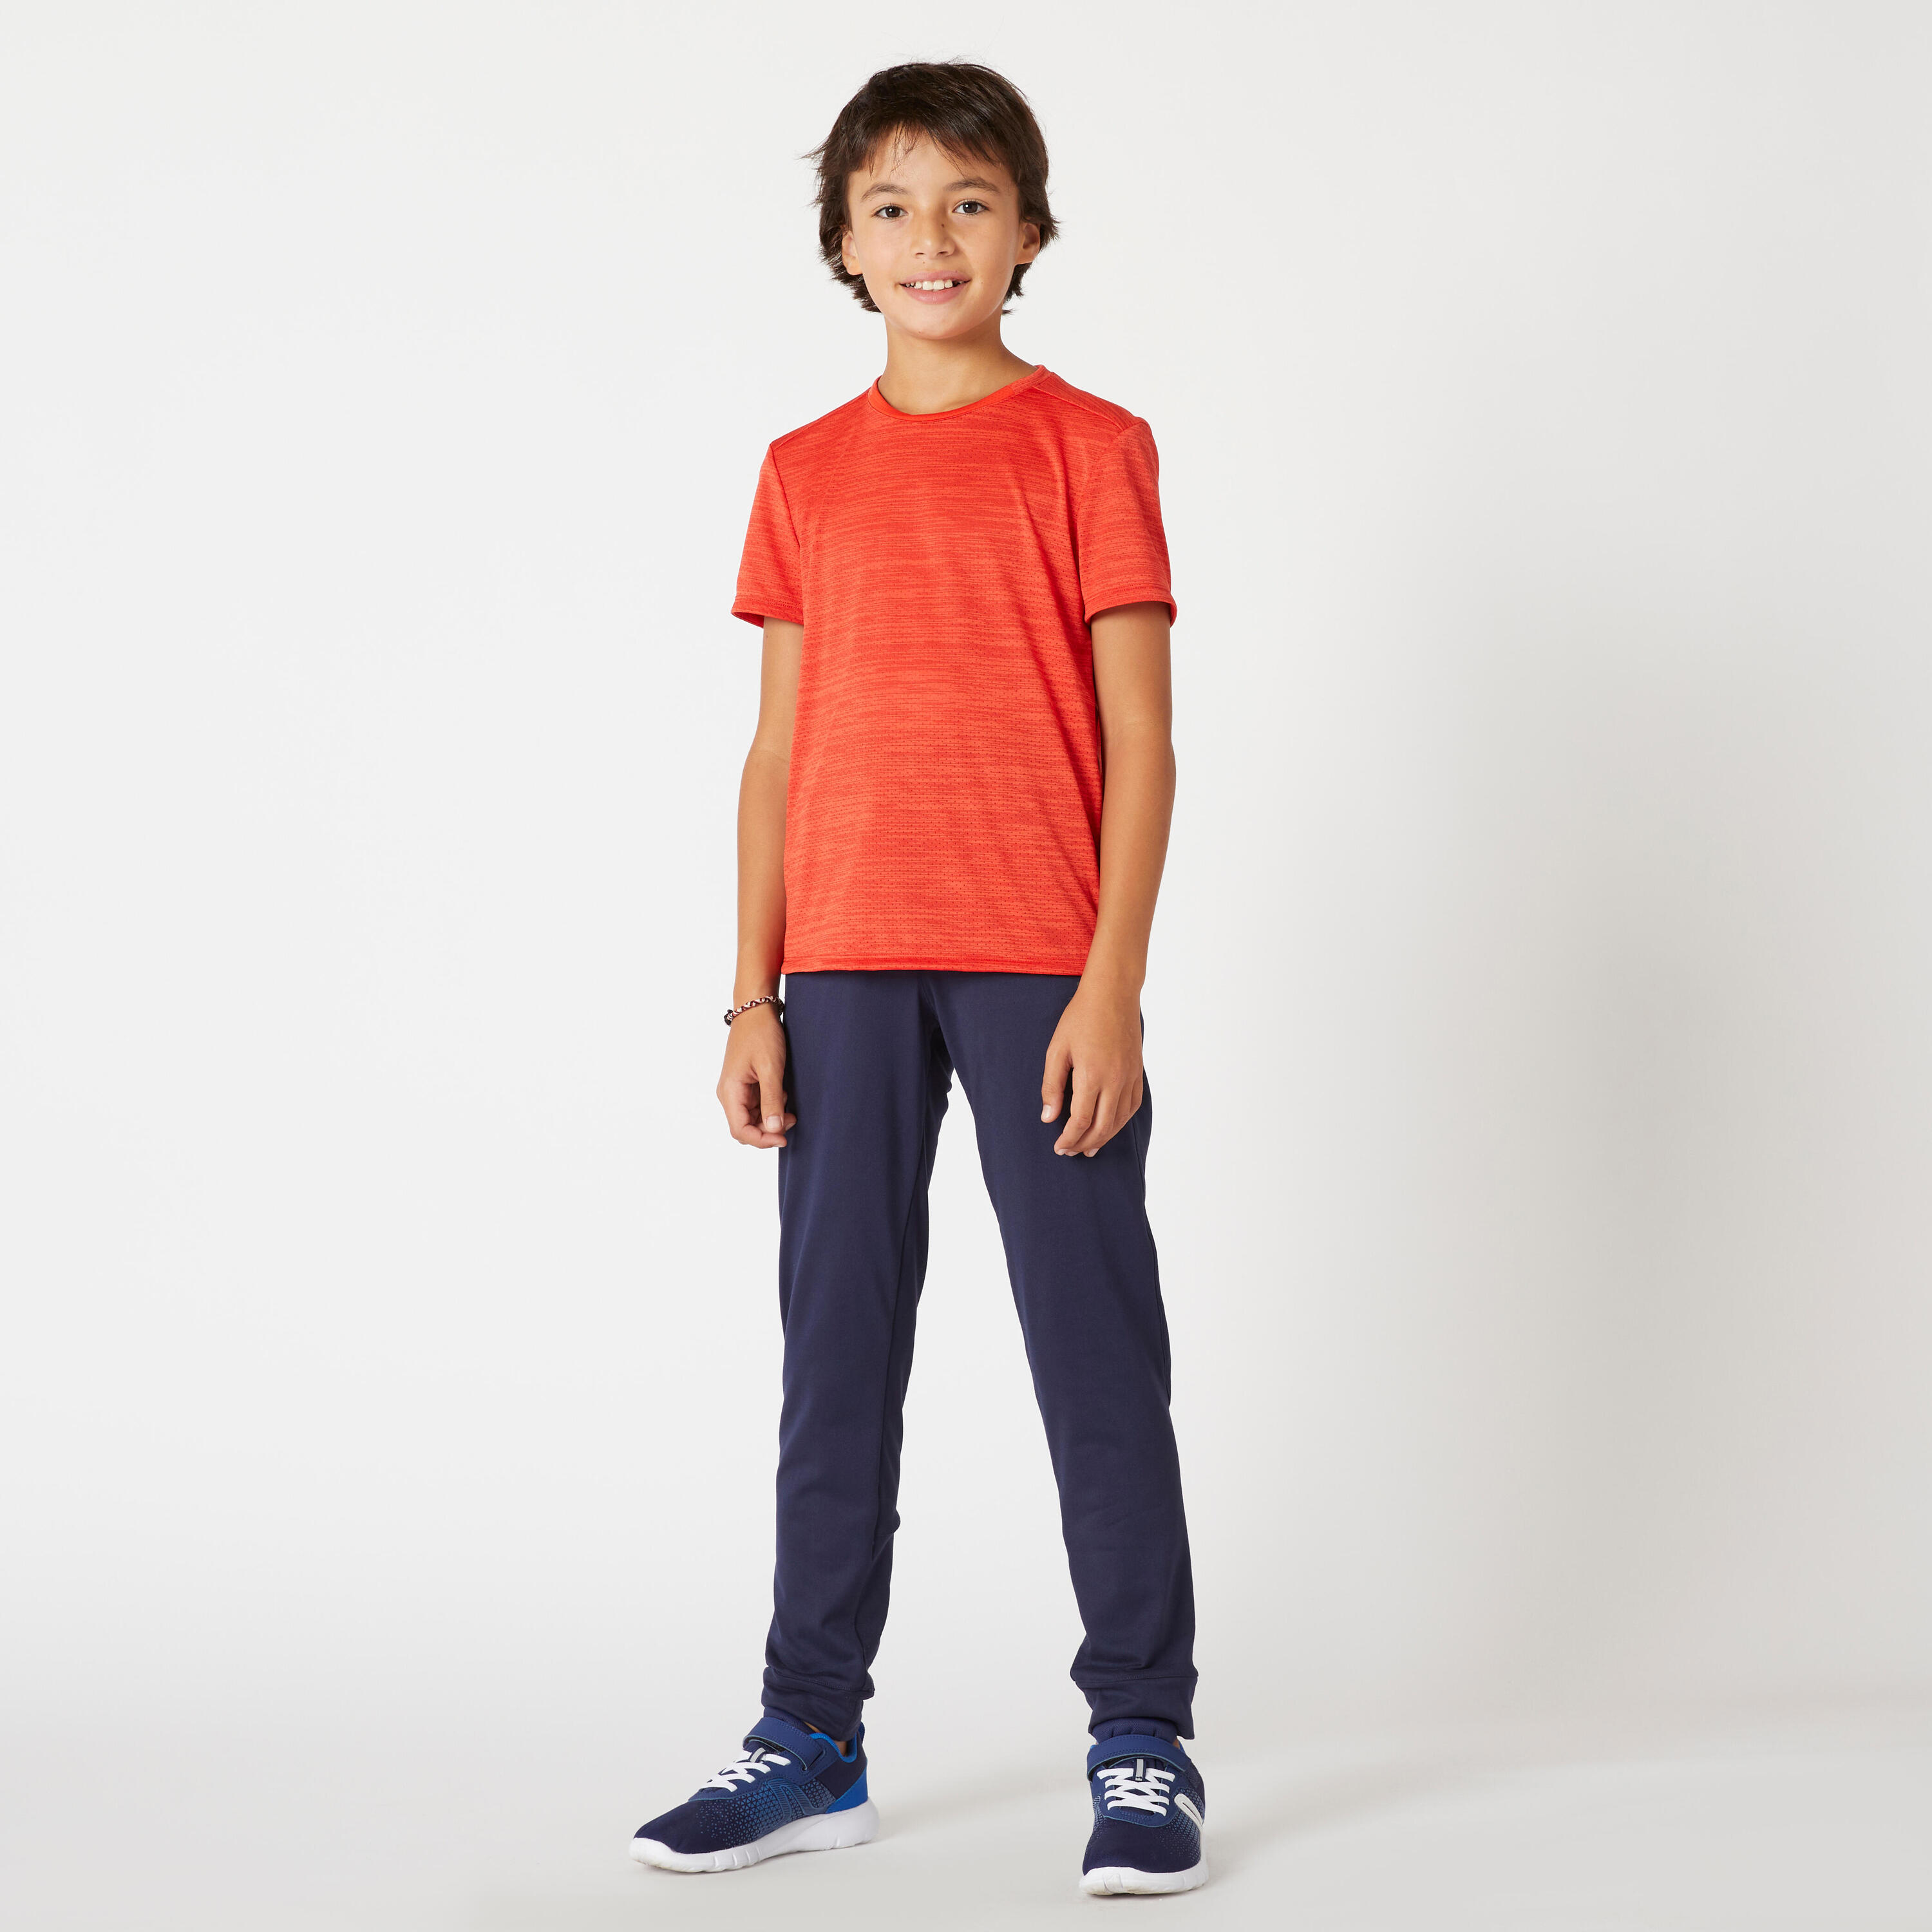 Kids' Warm Breathable Jogging Bottoms S500 - Navy 6/6